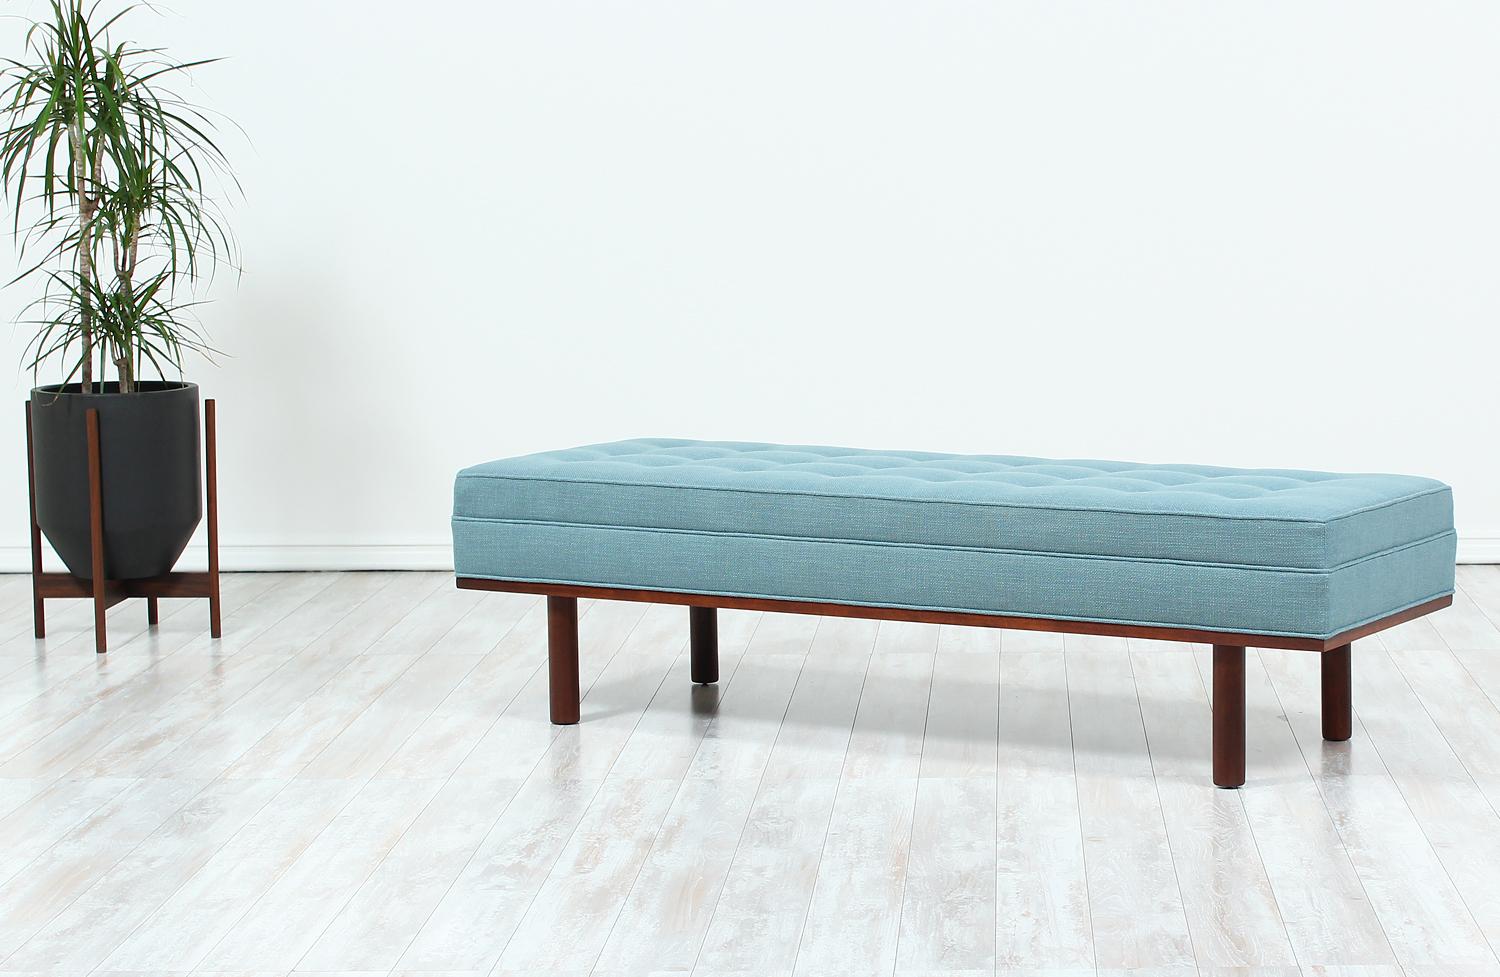 Mid-Century Modern bench designed and manufactured in the United States circa 1960s. This bench features a solid walnut wood base with cylindrical legs and a comfortable cushion with button-tufting detail. It has been re-upholstered with new